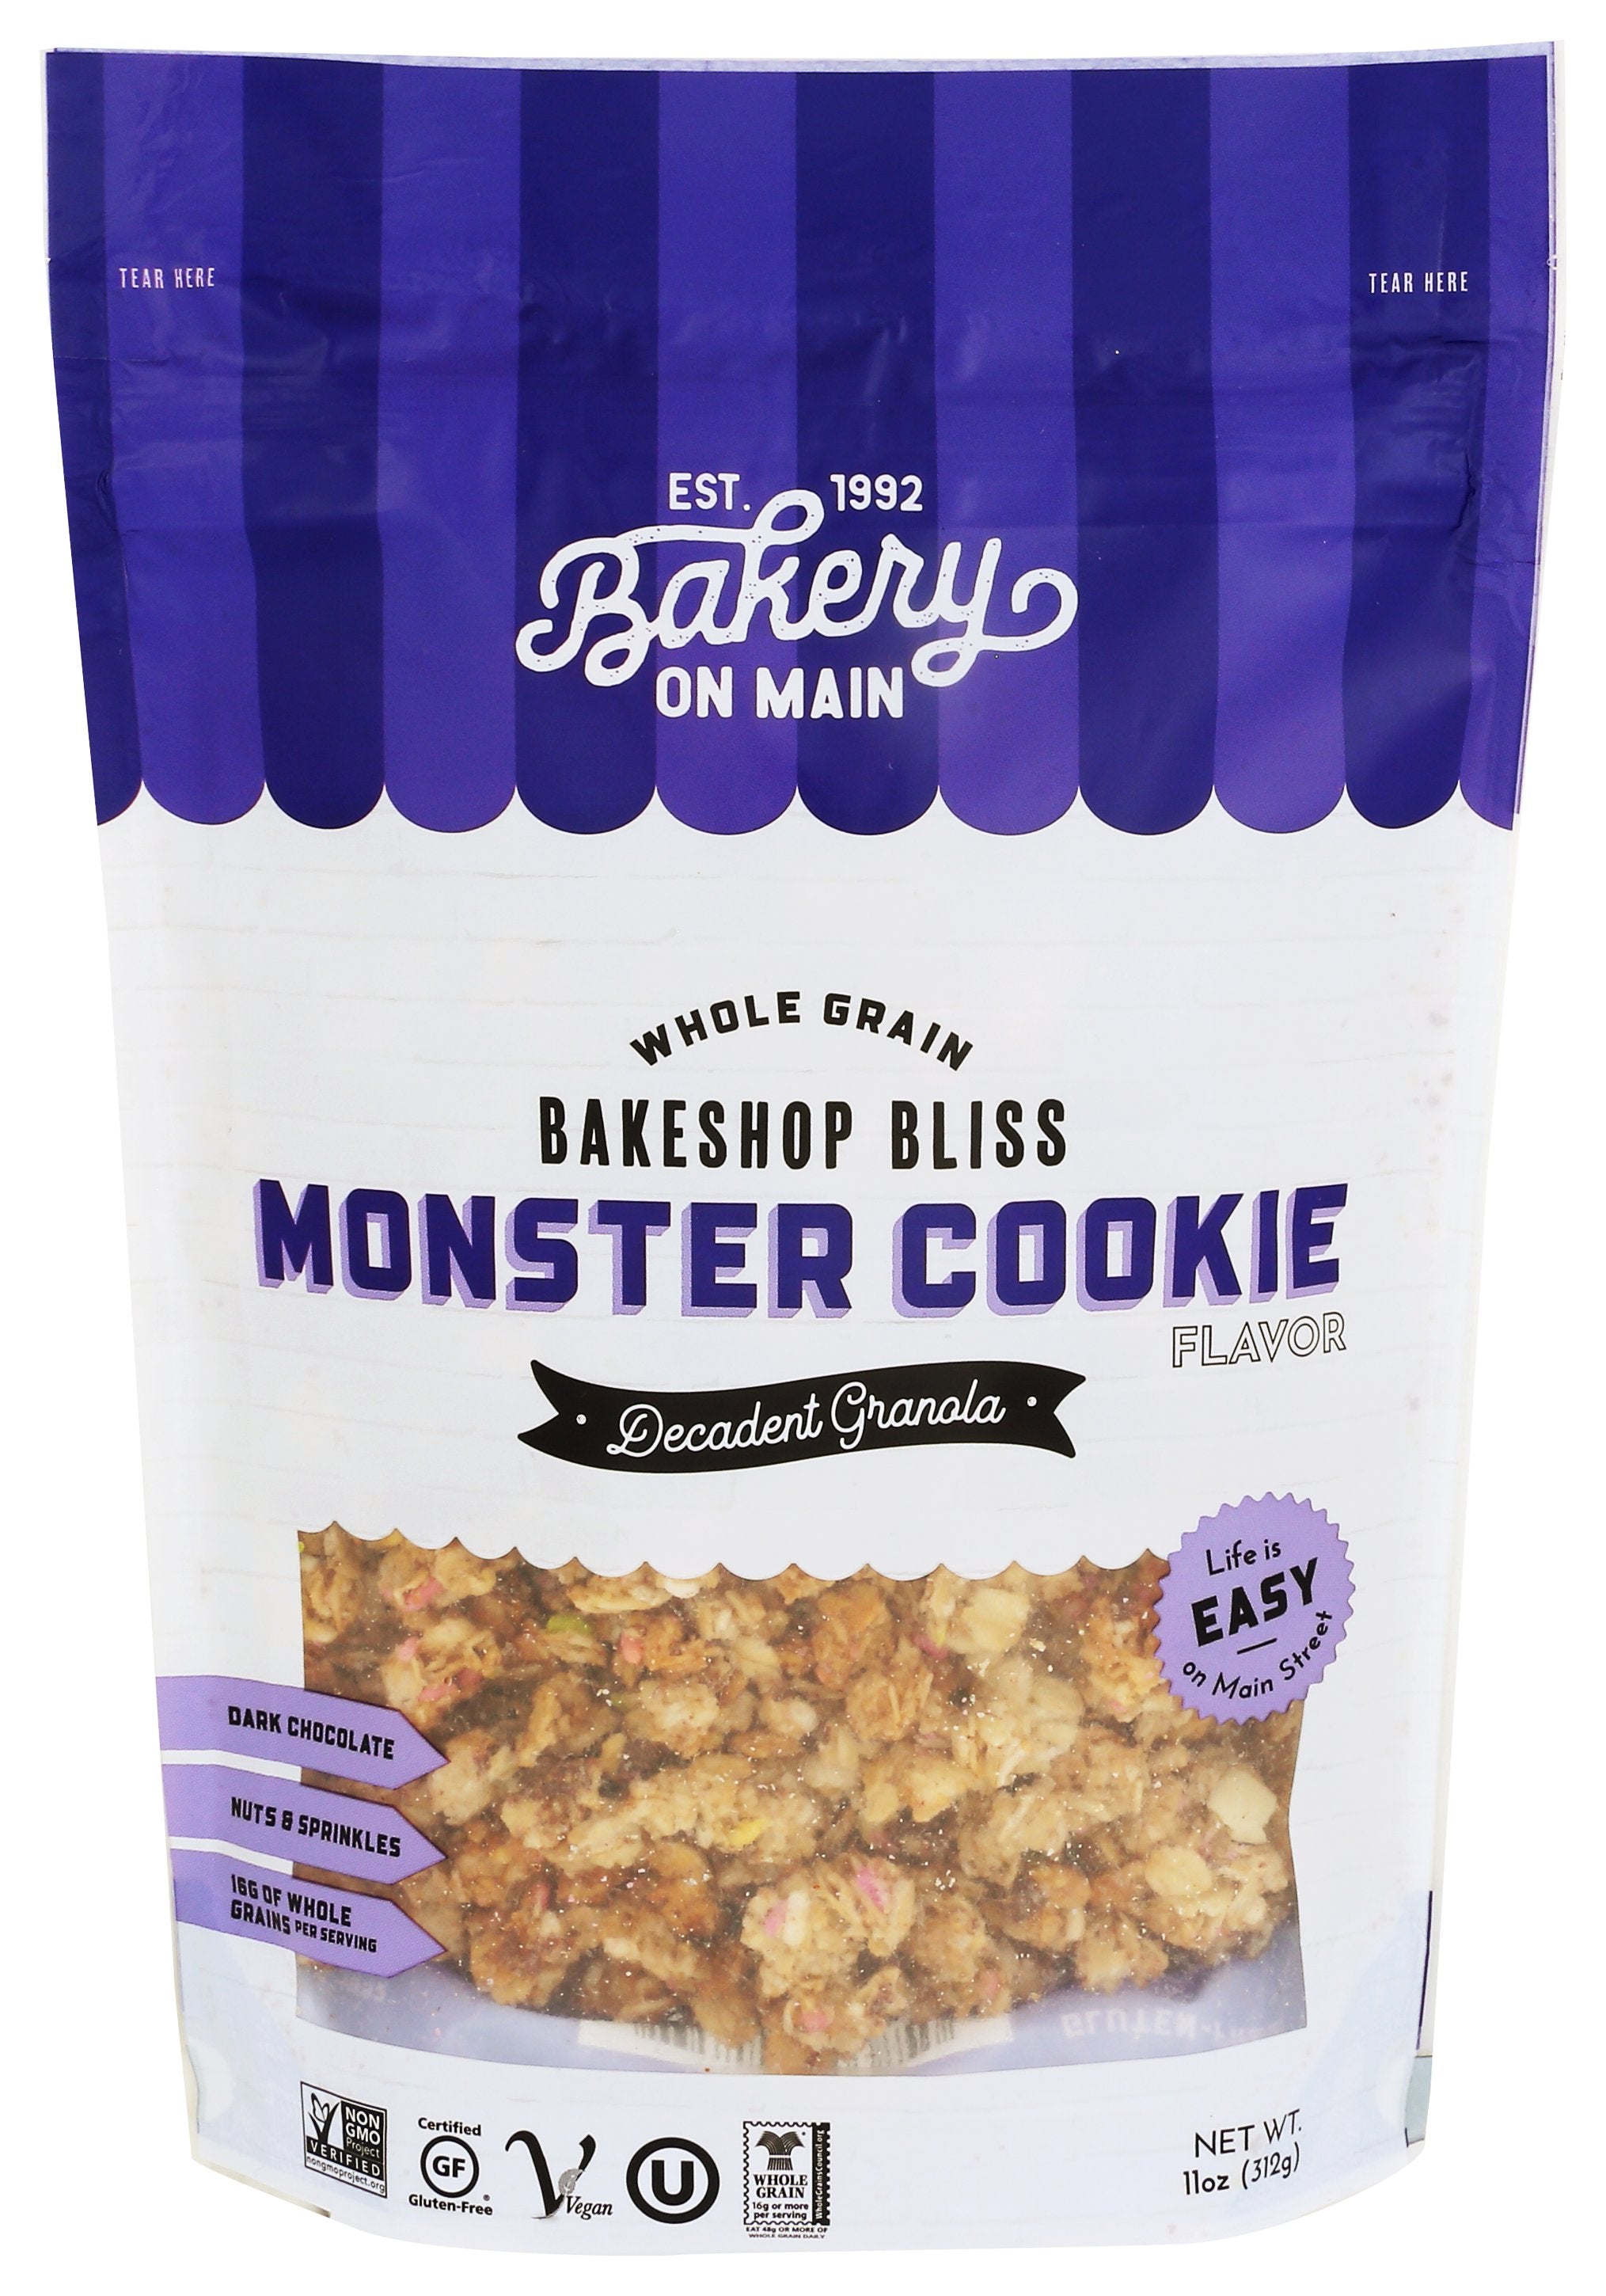 BAKERY ON MAIN GRANOLA MONSTER COOKIE - Case of 6